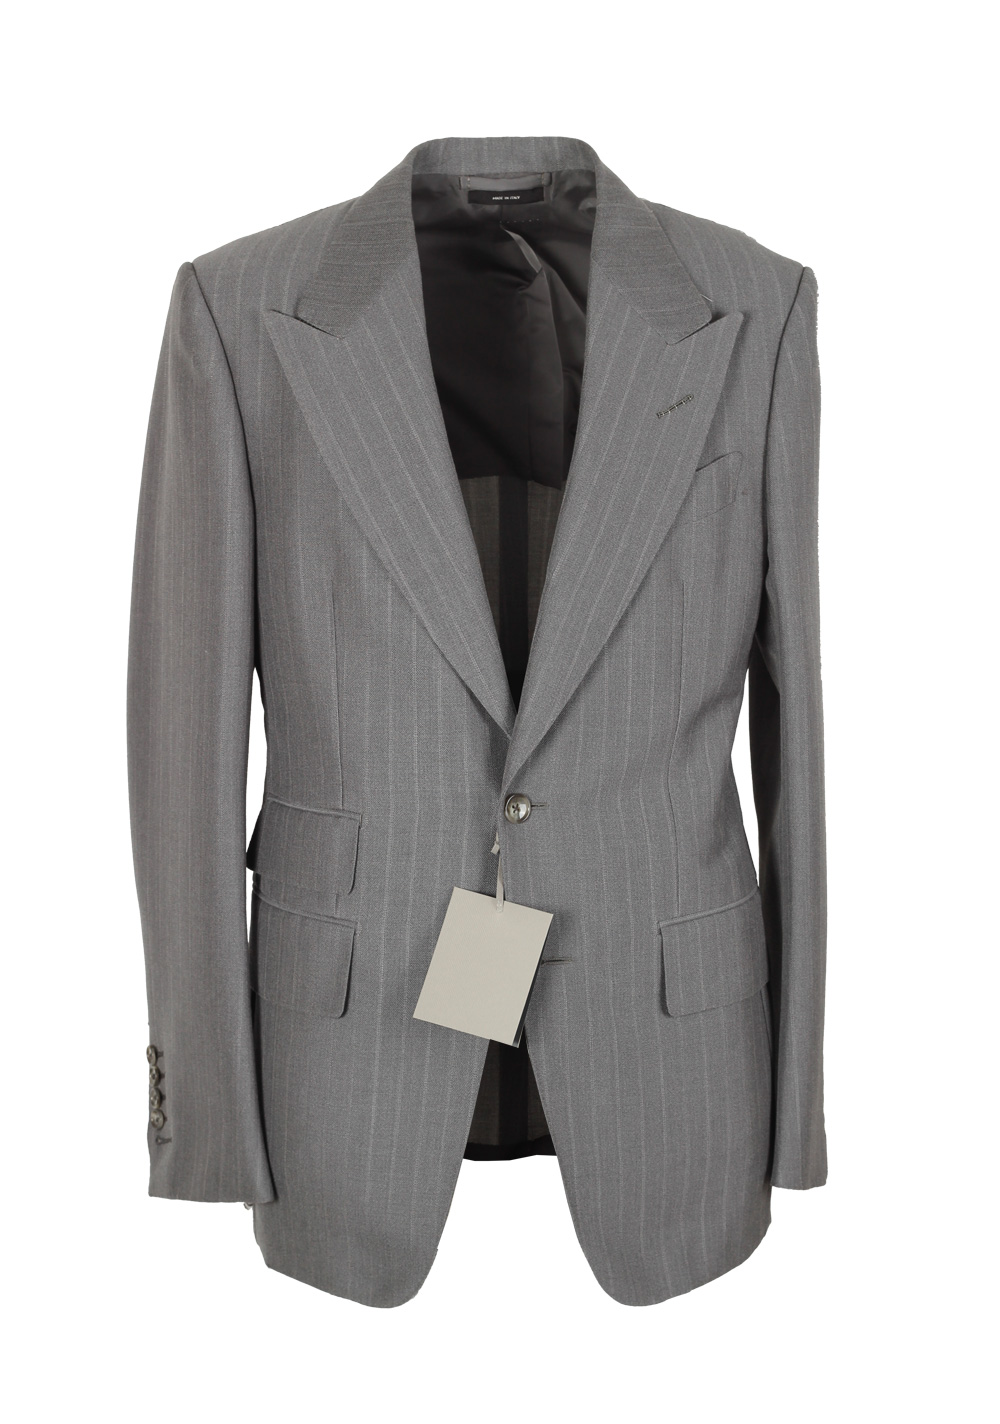 TOM FORD Shelton Striped Gray Suit Size 46 / 36R U.S. In Mohair Wool ...